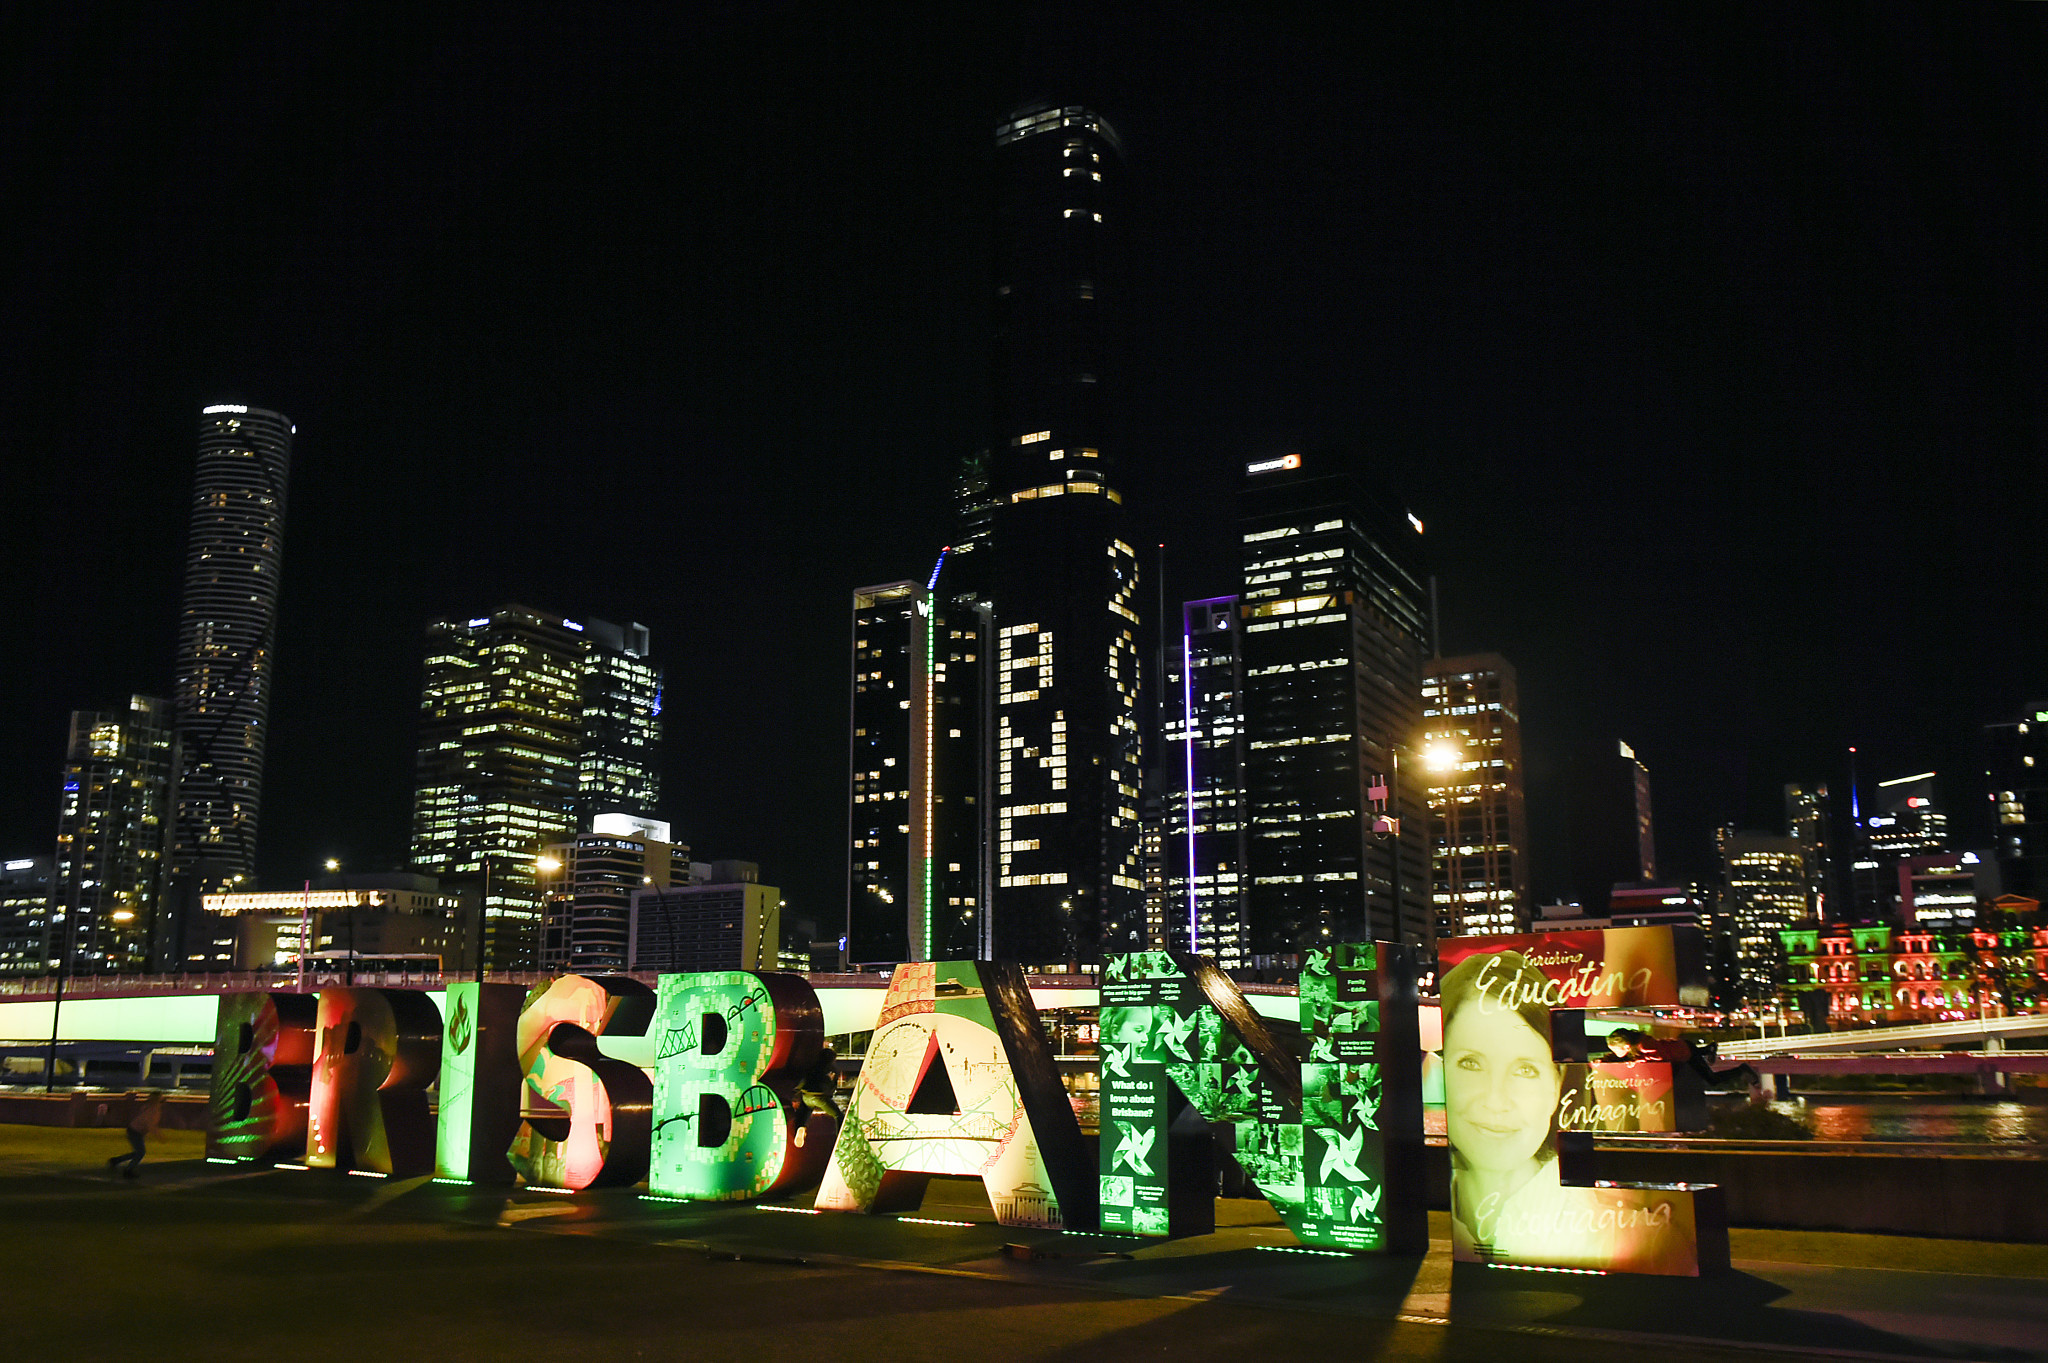 Brisbane is set to host the Olympic and Paralympic Games in 2032 ©Getty Images